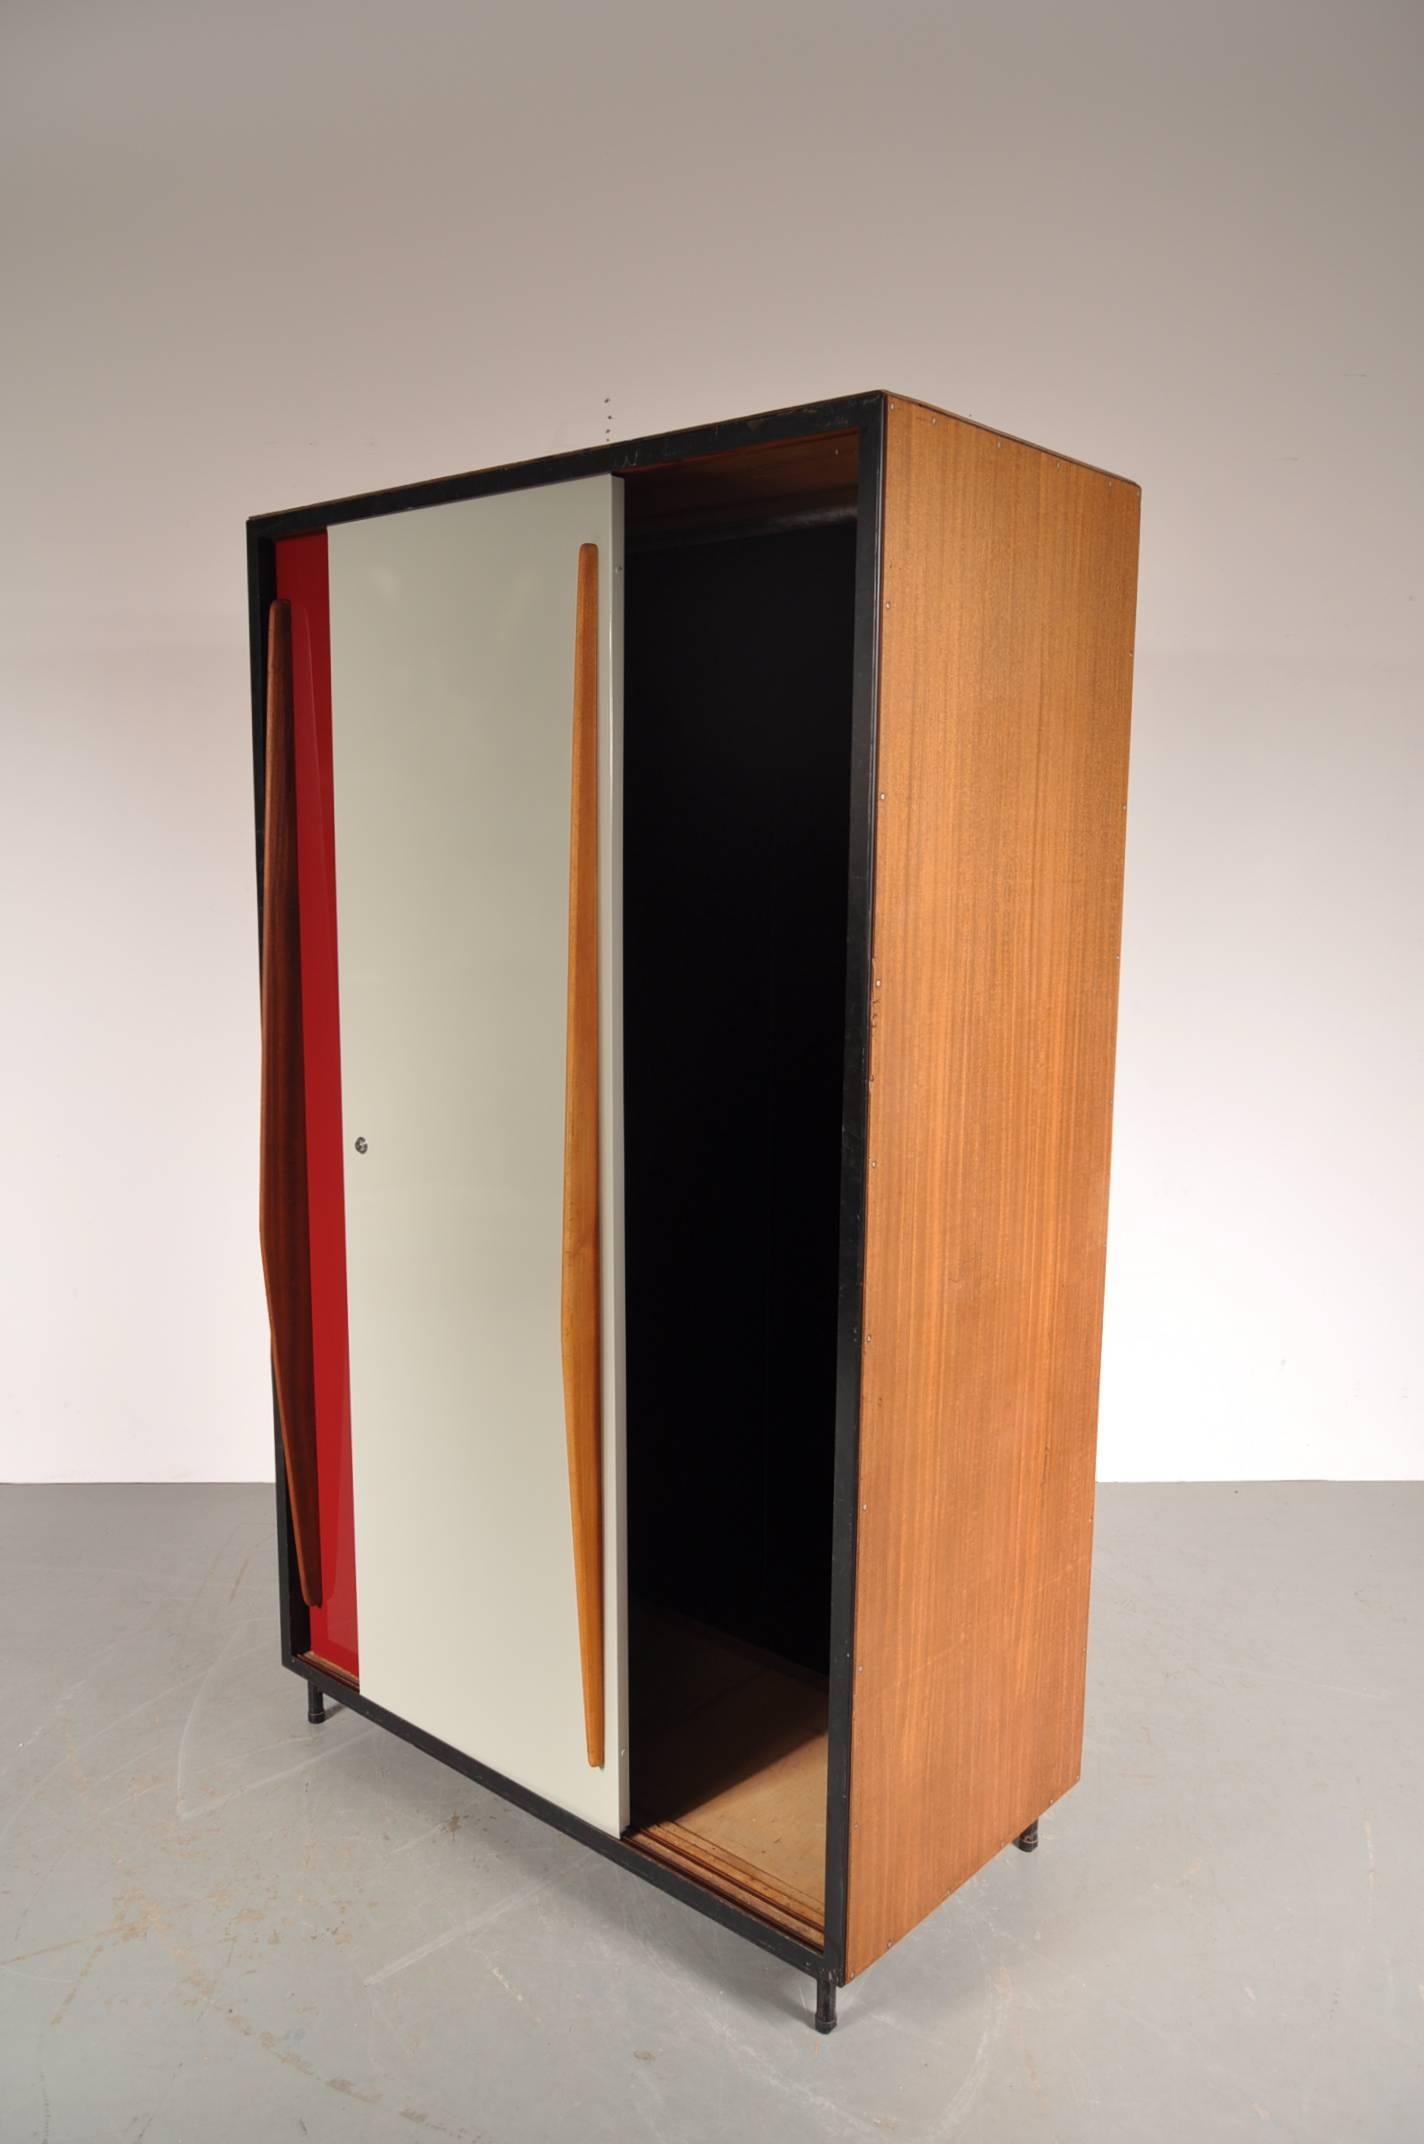 Amazing wardrobe designed by Willy Van Der Meeren, manufactured by Tubax in Belgium in 1952.

This eye-catching piece is made of beautiful quality wood on a black metal structure. The most unique features are the red and white metal sliding doors